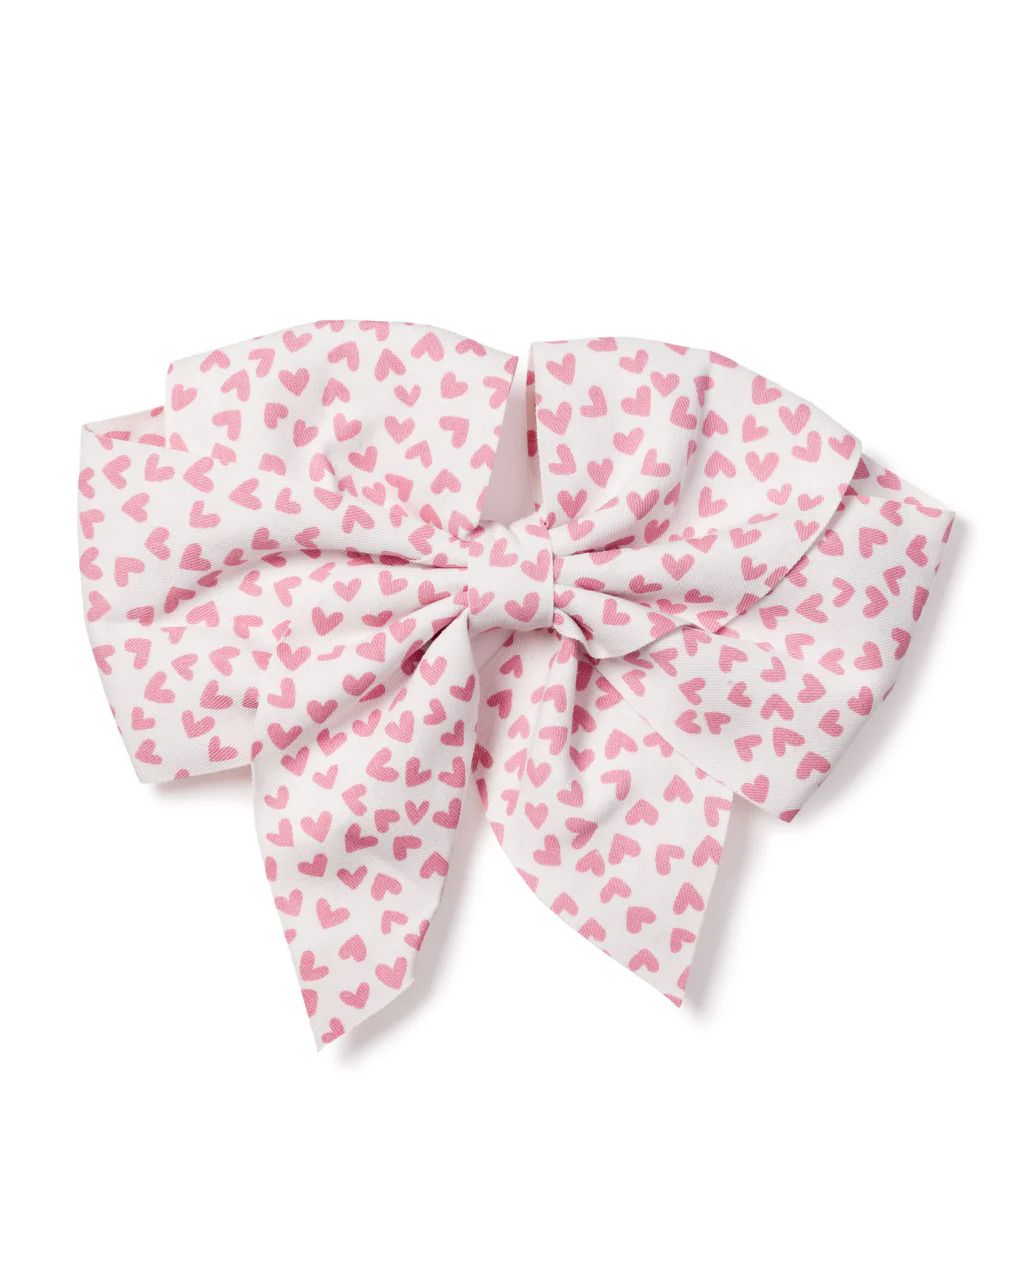 Girl's Hair Bows in Sweethearts | Petite Plume